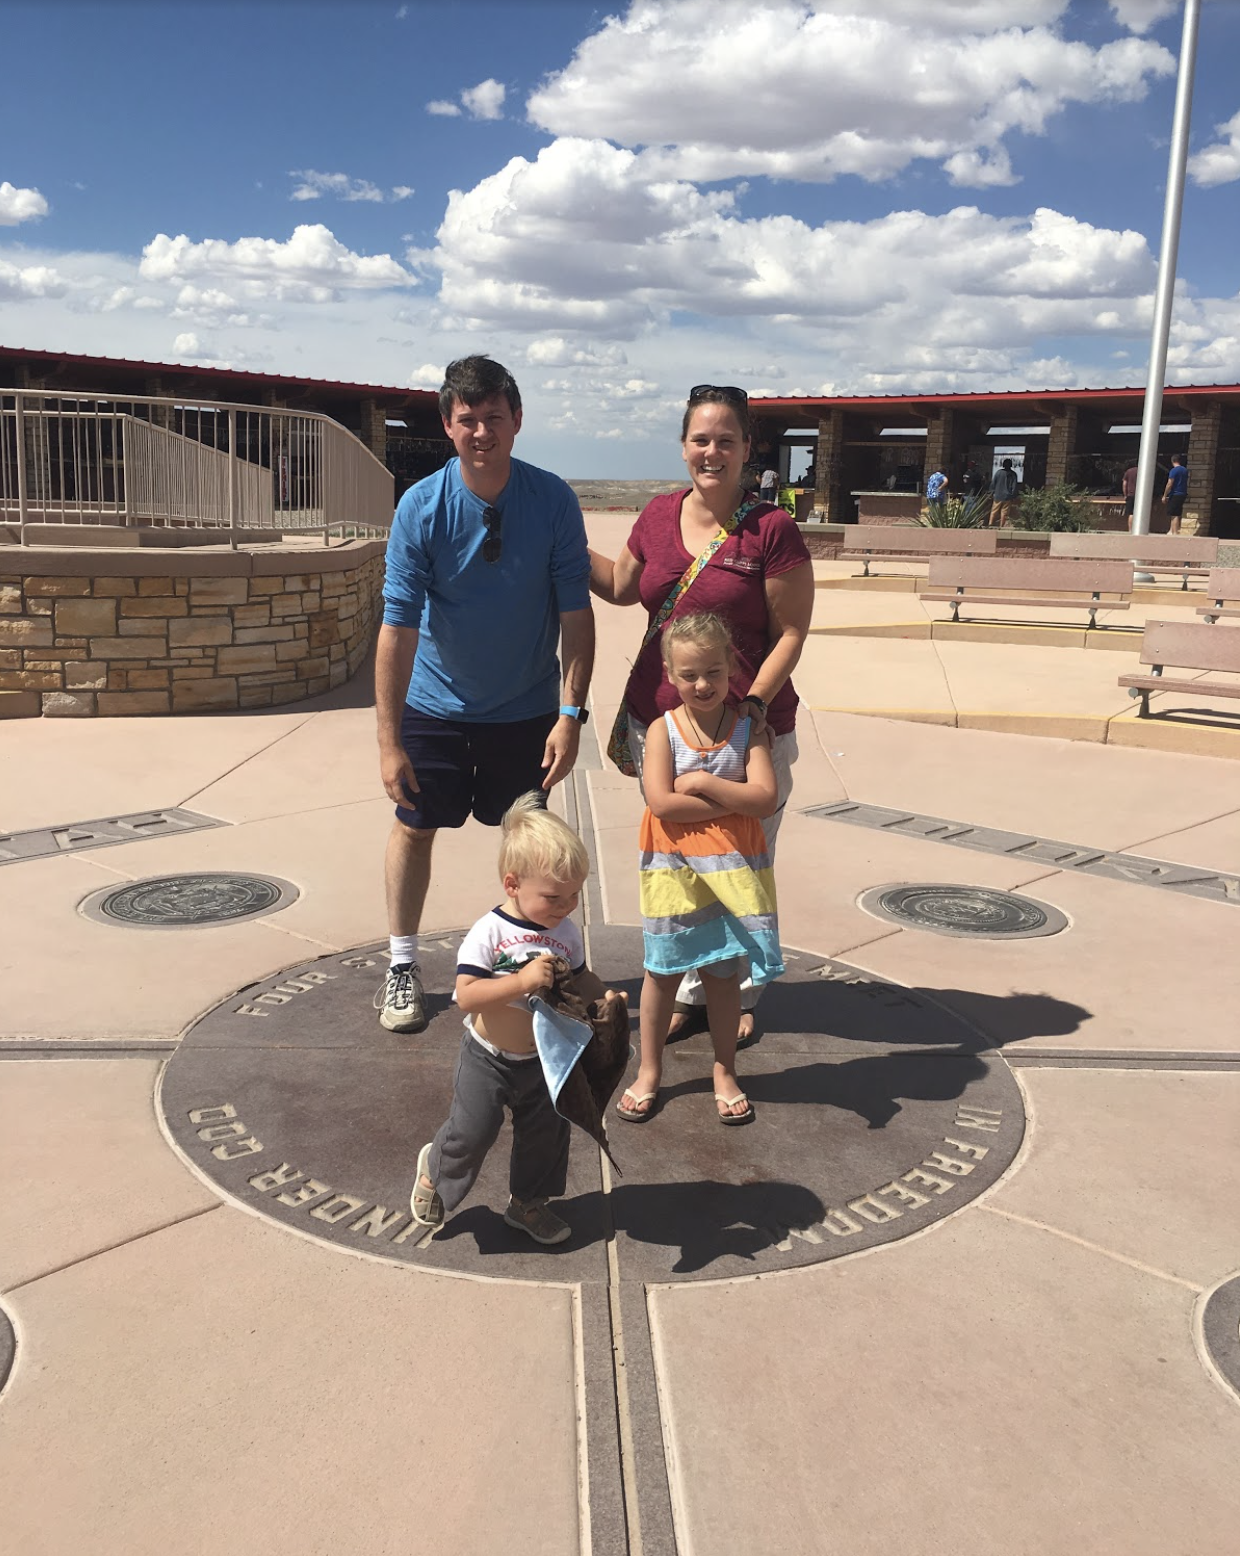 Here’s our family photo with each of us in a different state - You can see most of “UTAH” and “COLORADO” on the ground behind us.&nbsp; Popcorn preferred to run through the states over posing for a picture. Photo by kind stranger, 5/30/16